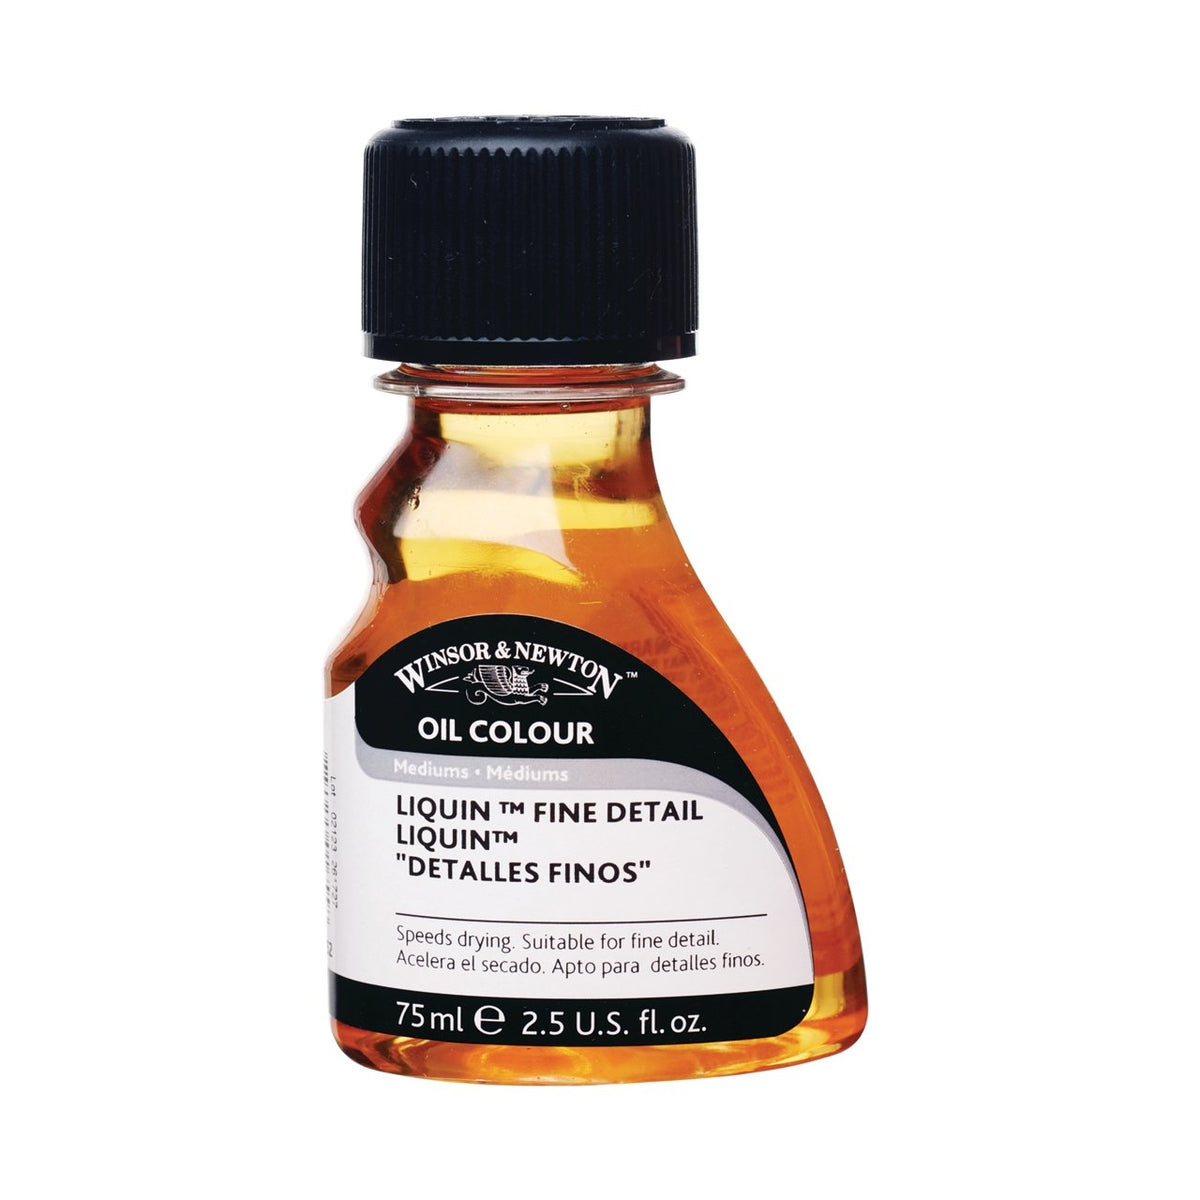 Winsor & Newton Oil Color Solvents - English Distilled Turpentine, 75ml  Bottle